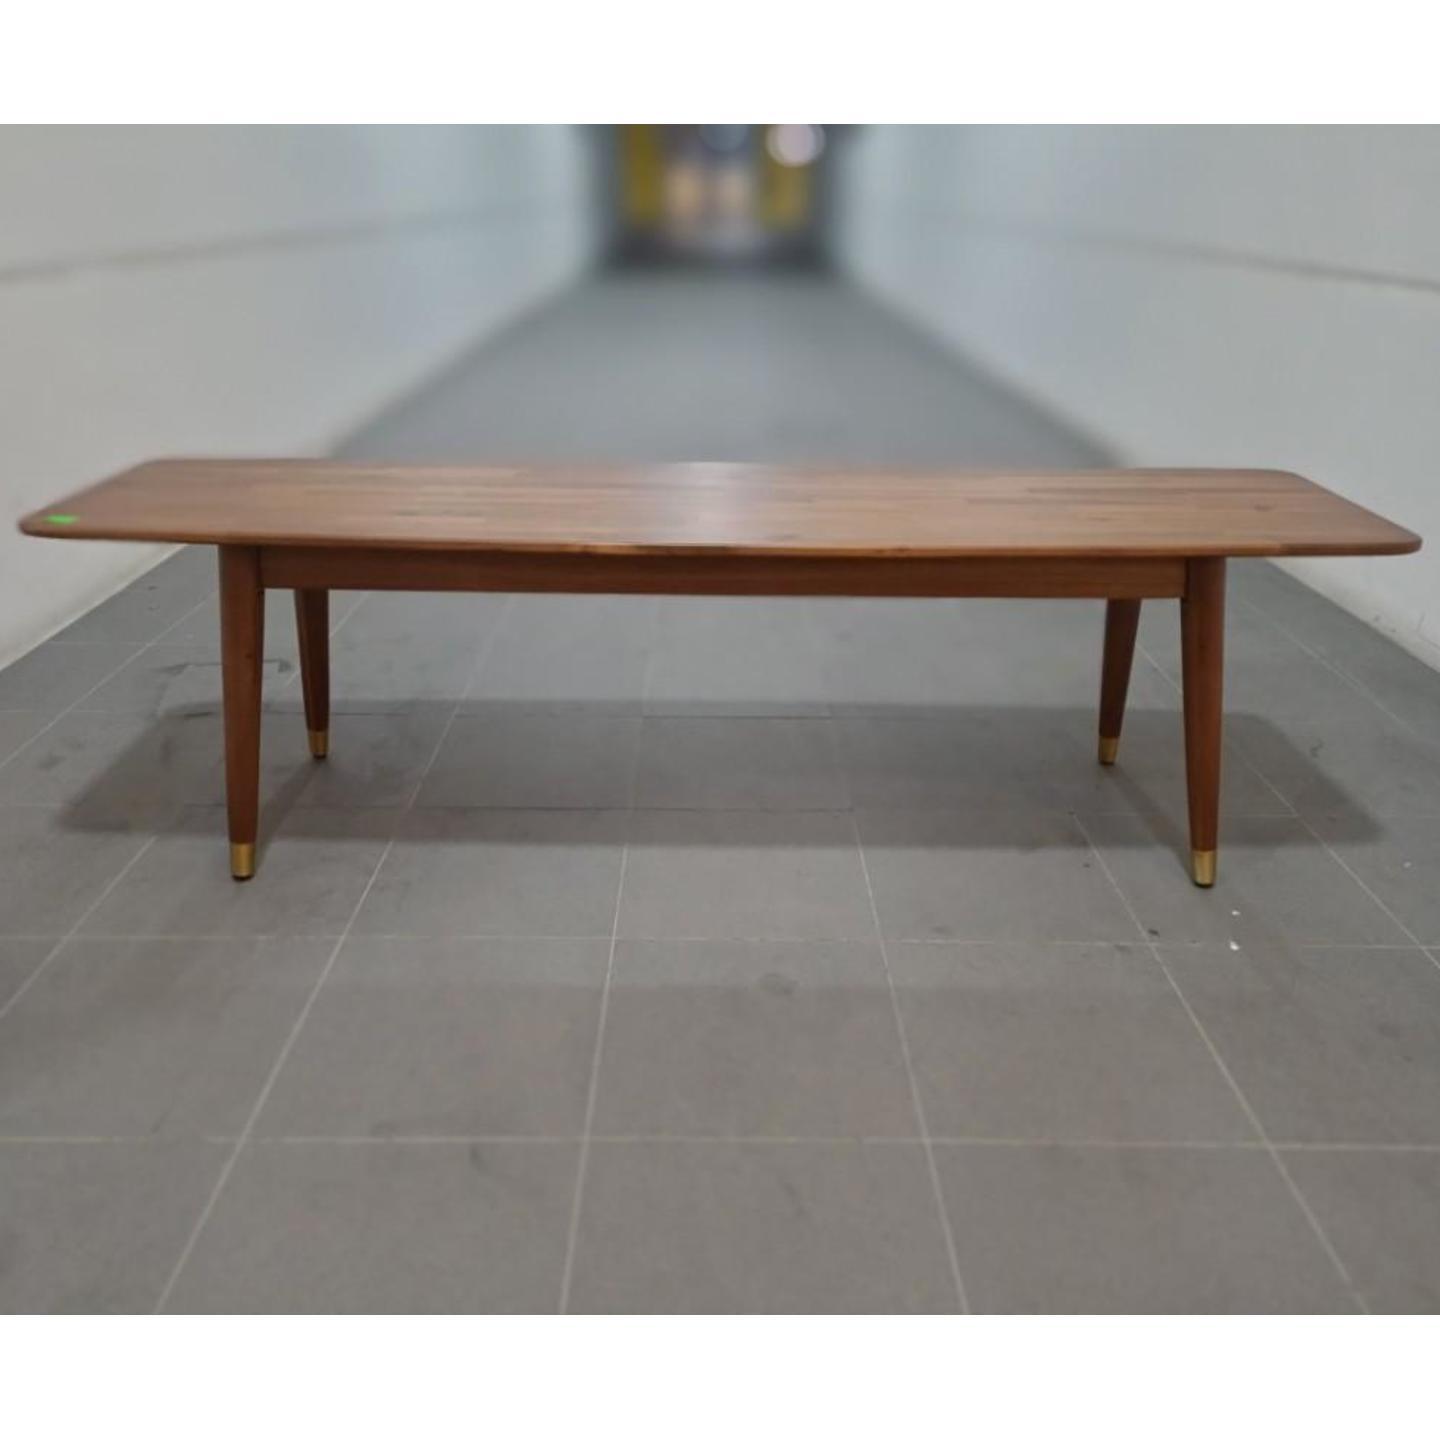 SYEKYO Wooden Dining Bench